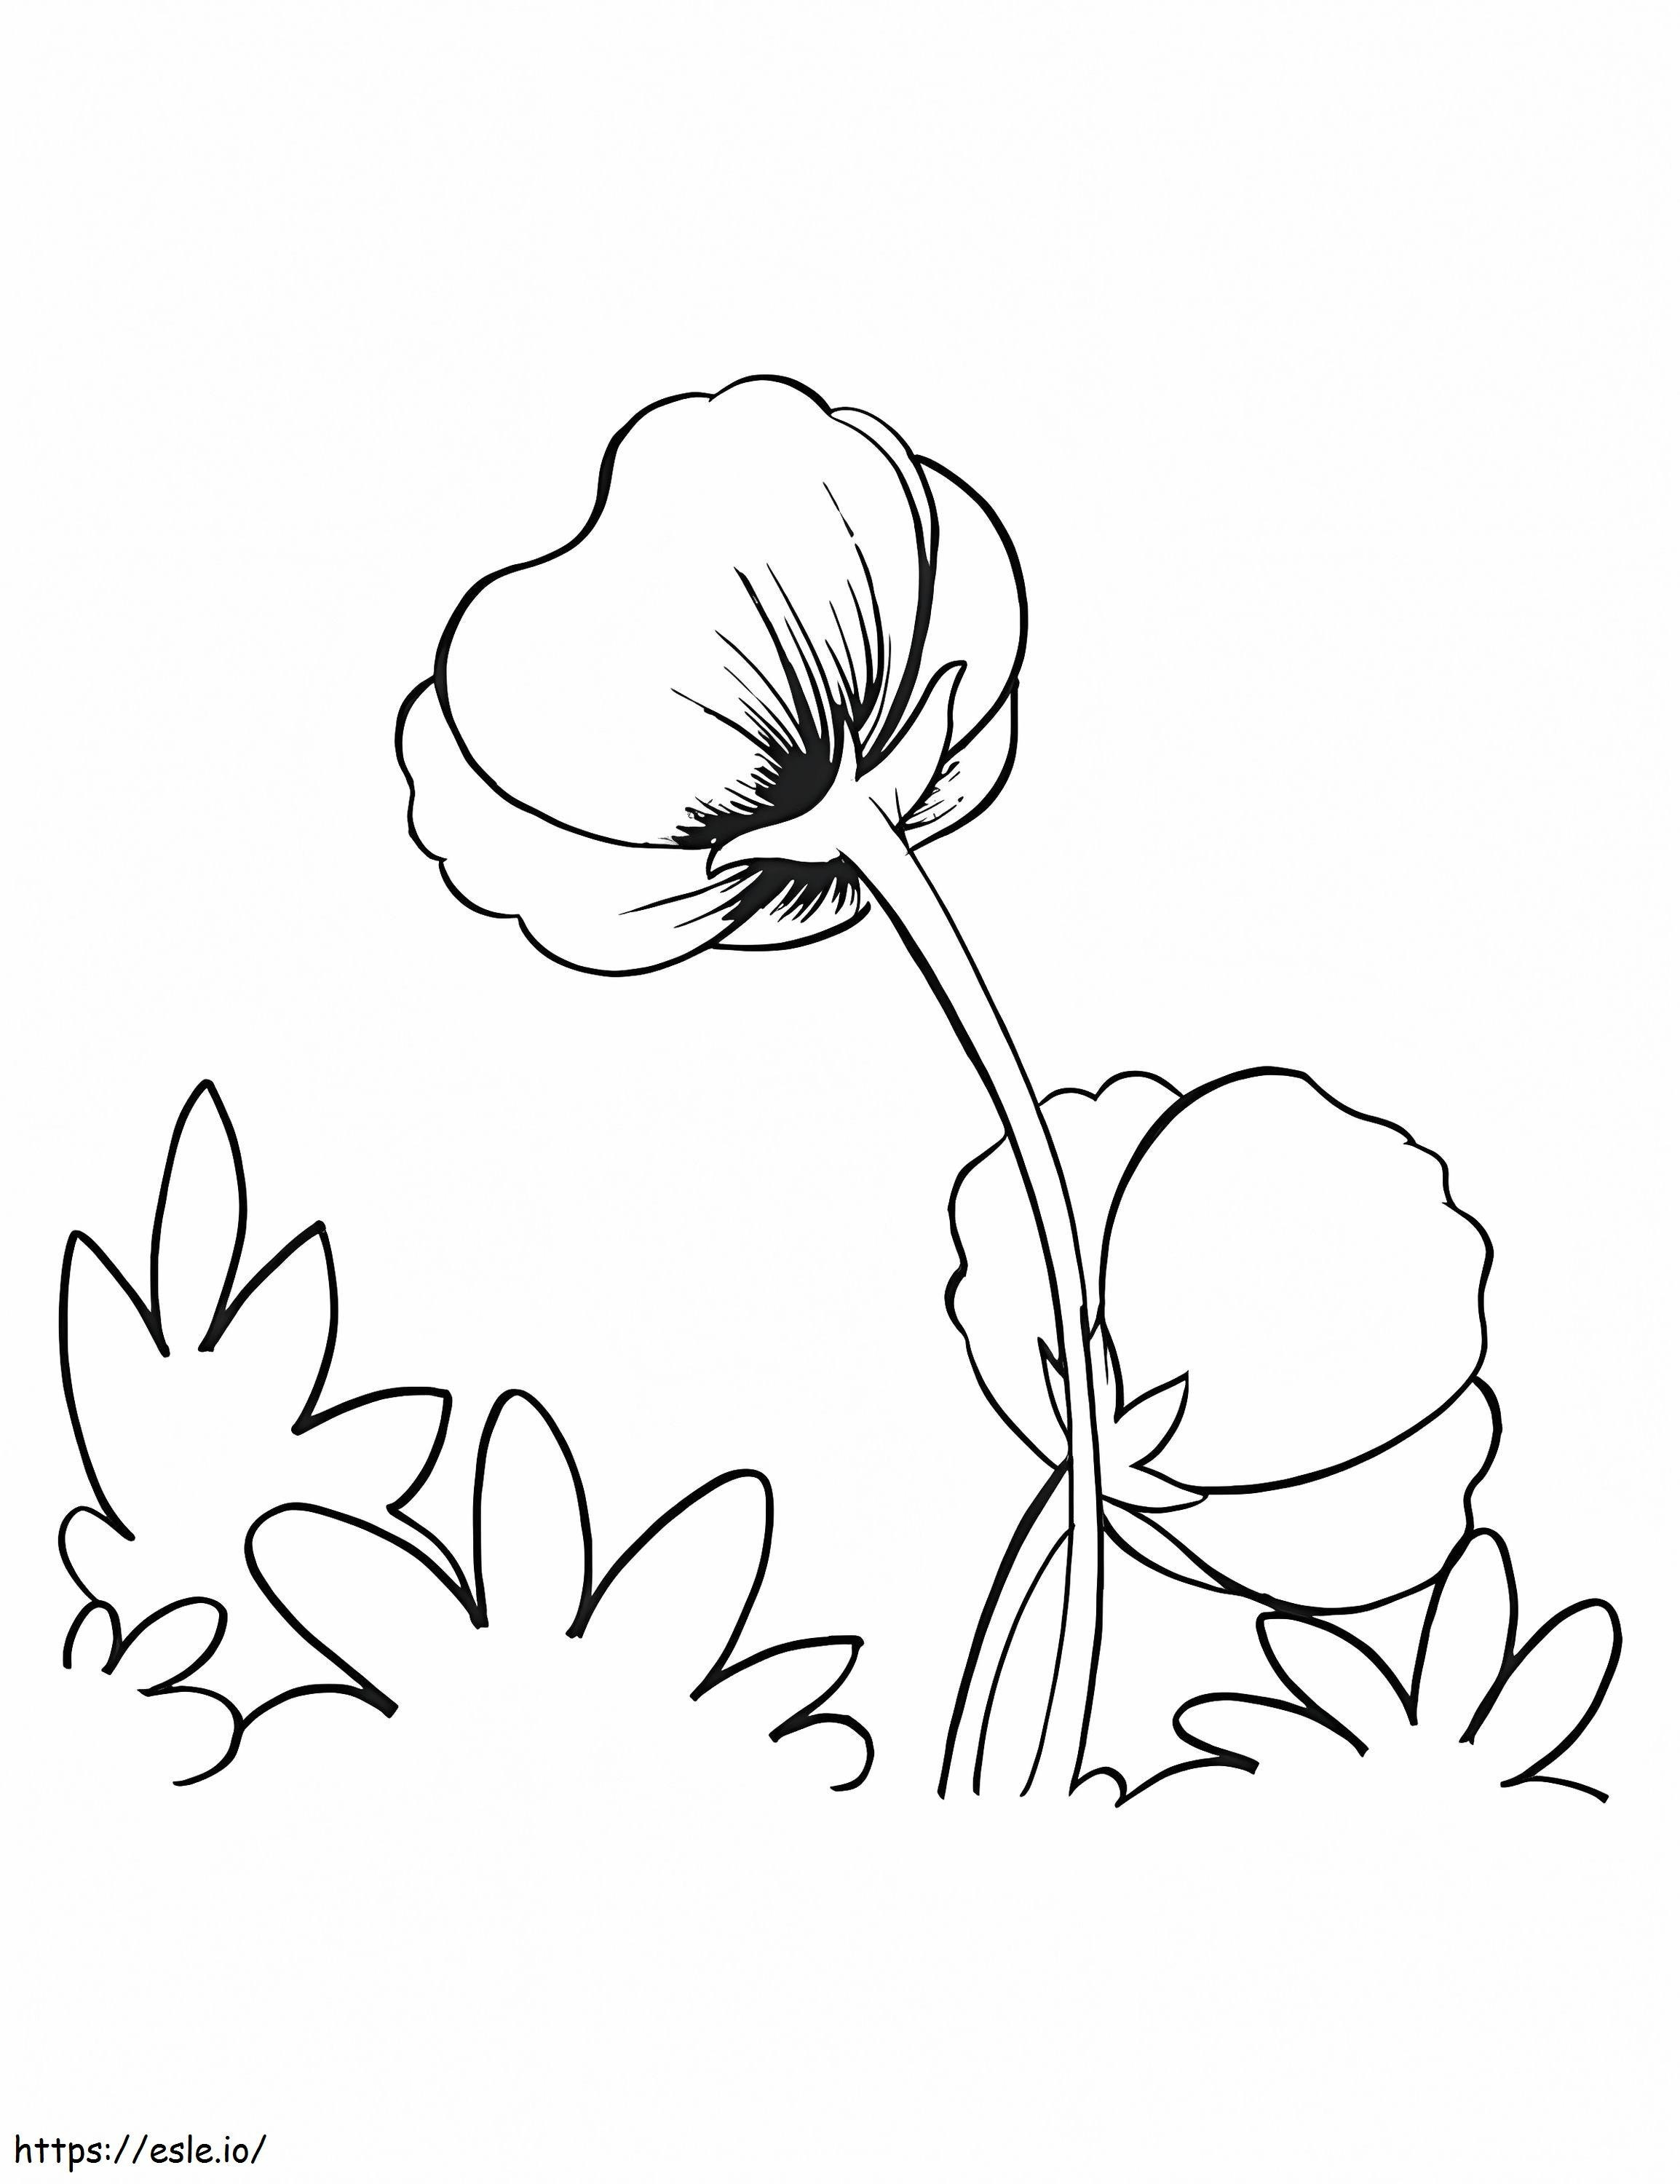 Two Poppies coloring page